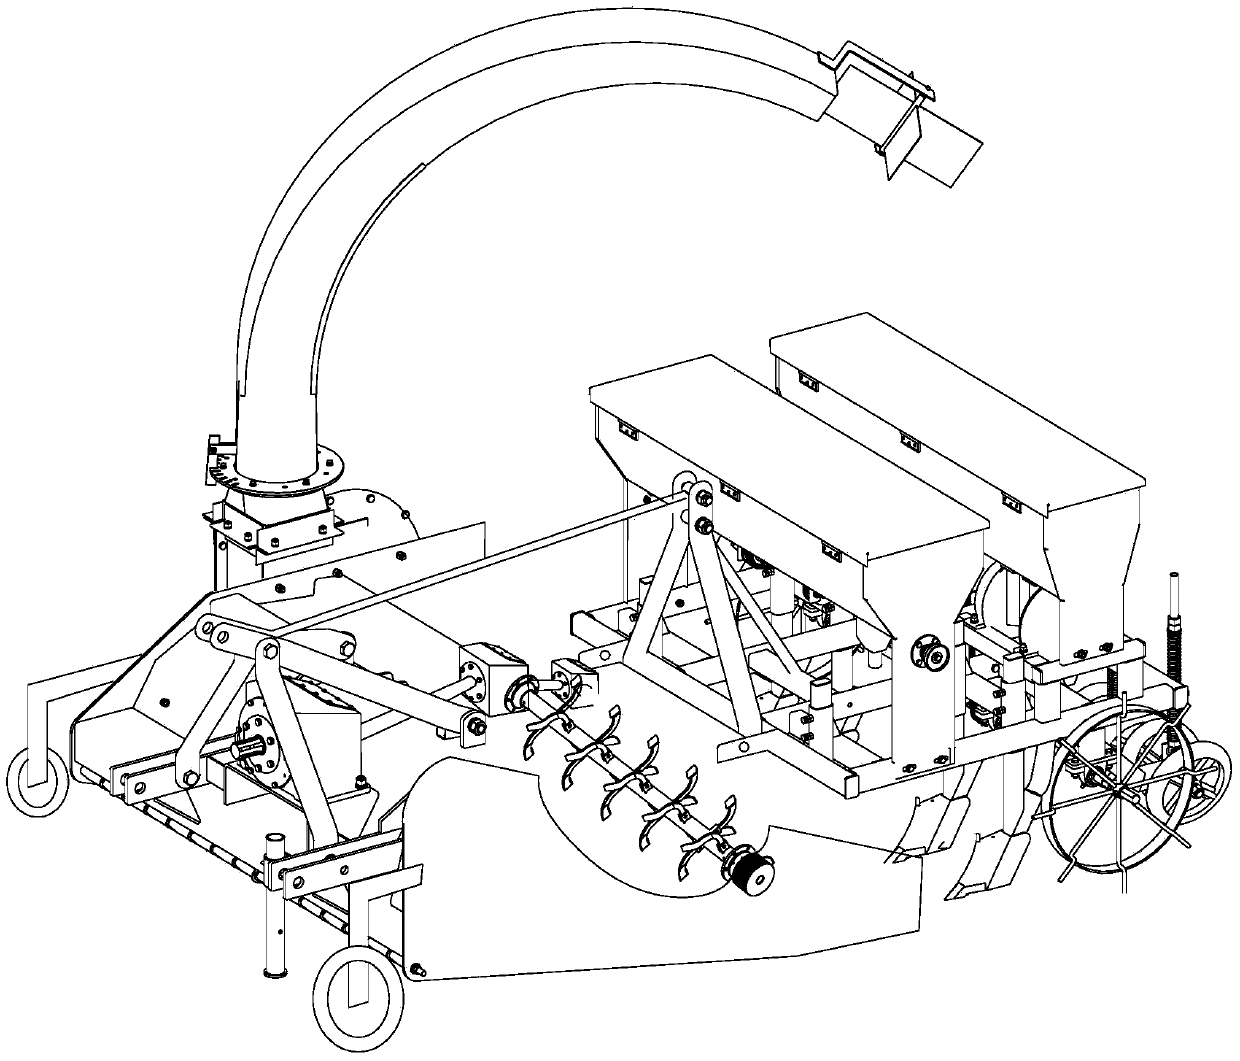 Wheat no-tillage seeding machine suitable for full straw mulched ground operation